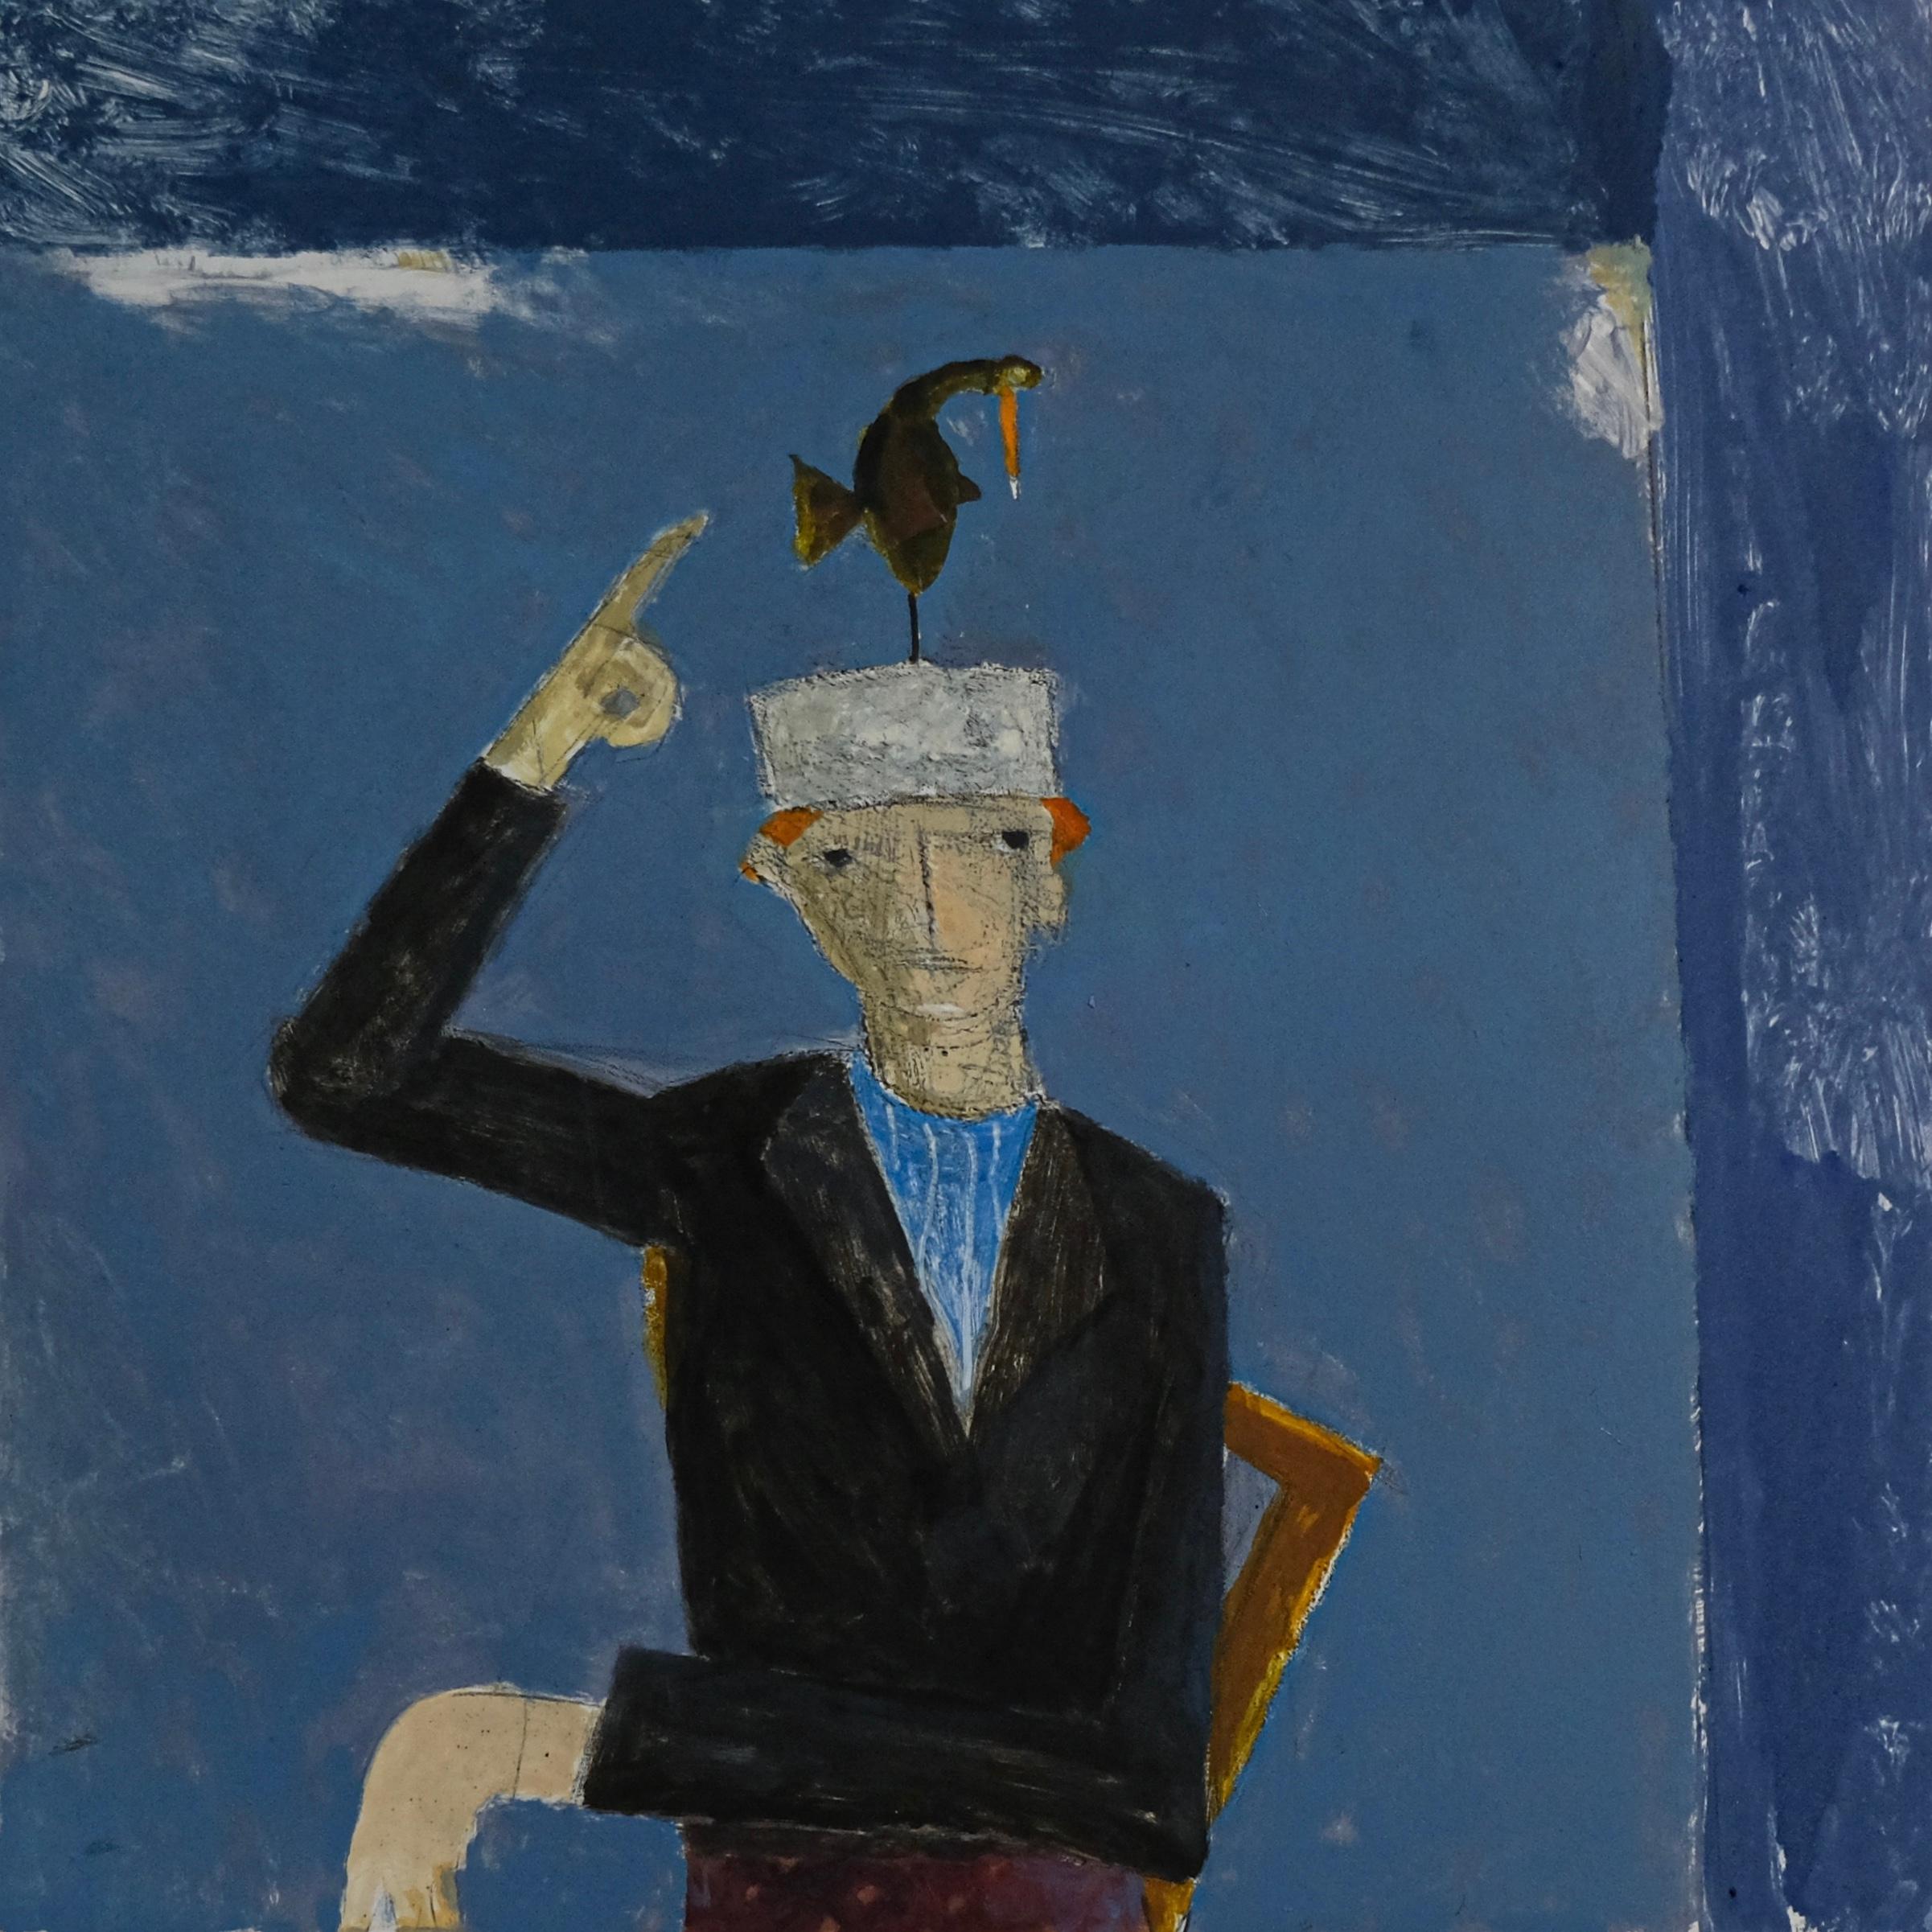 Malcolm Moran Portrait Painting - A Bird Landed on Francis' Head, mixed media portrait of man and bird, blue